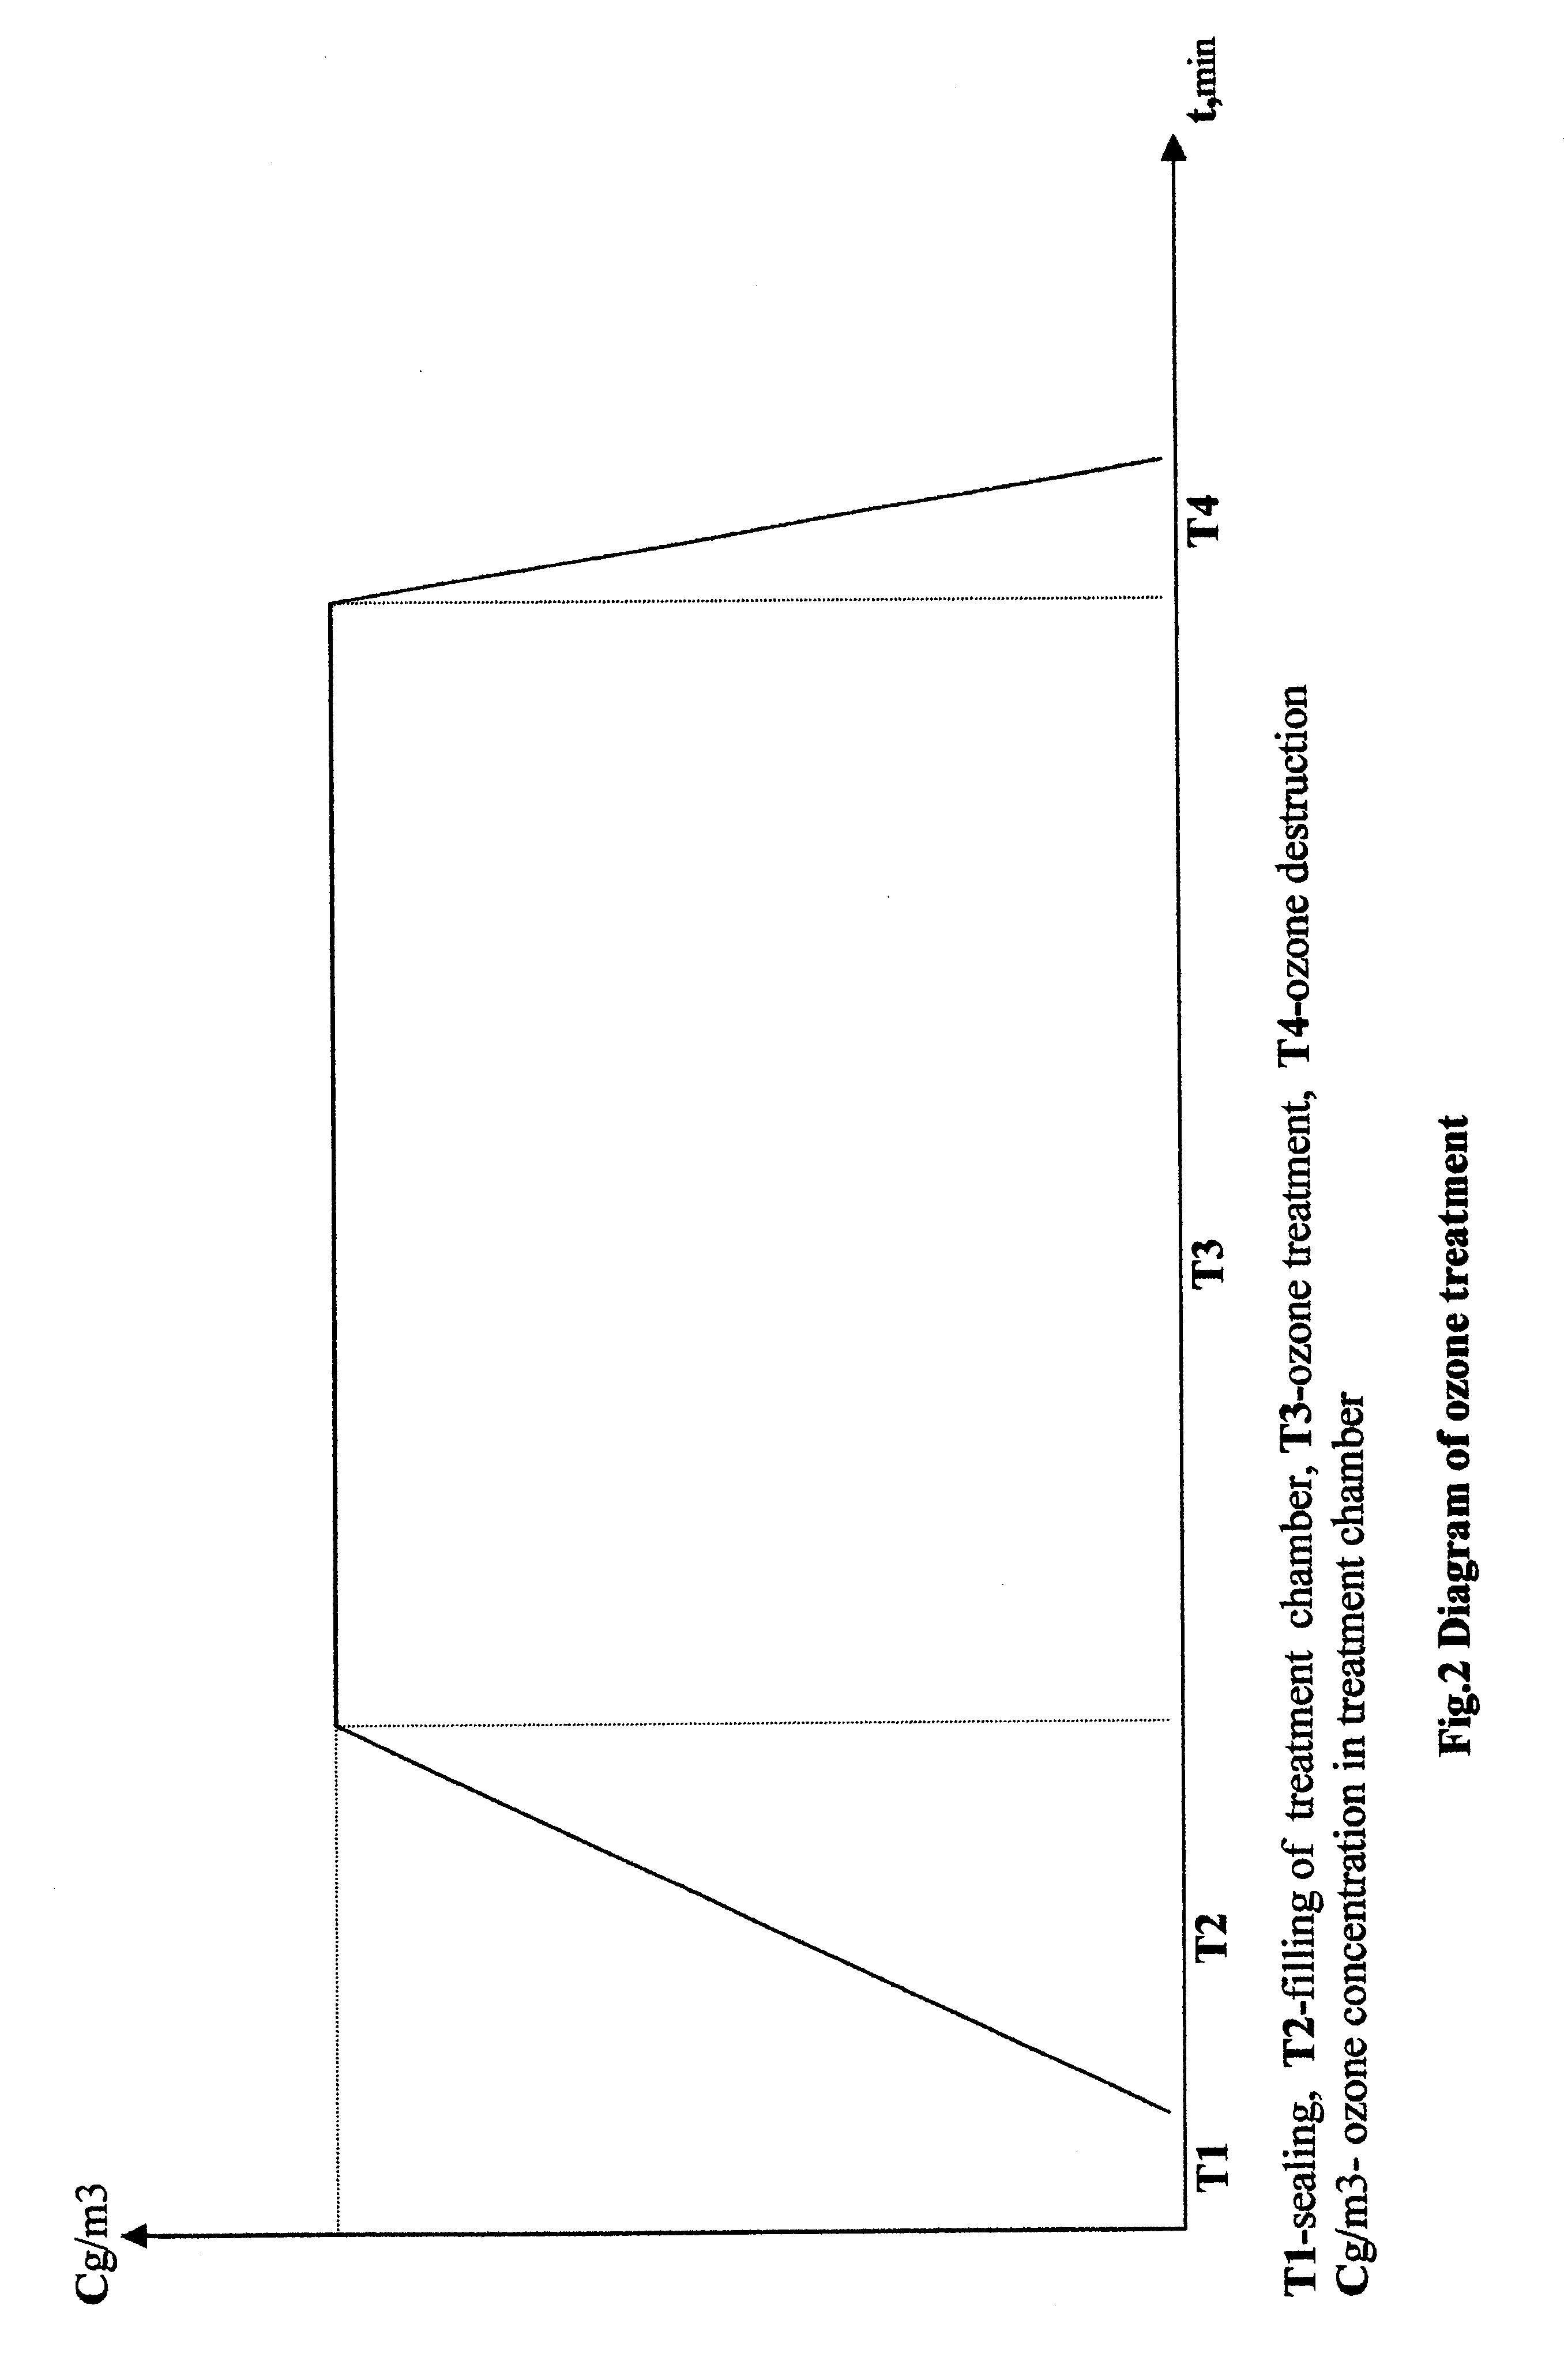 Apparatus and method of treatment of wounds, burns and immune system disorders